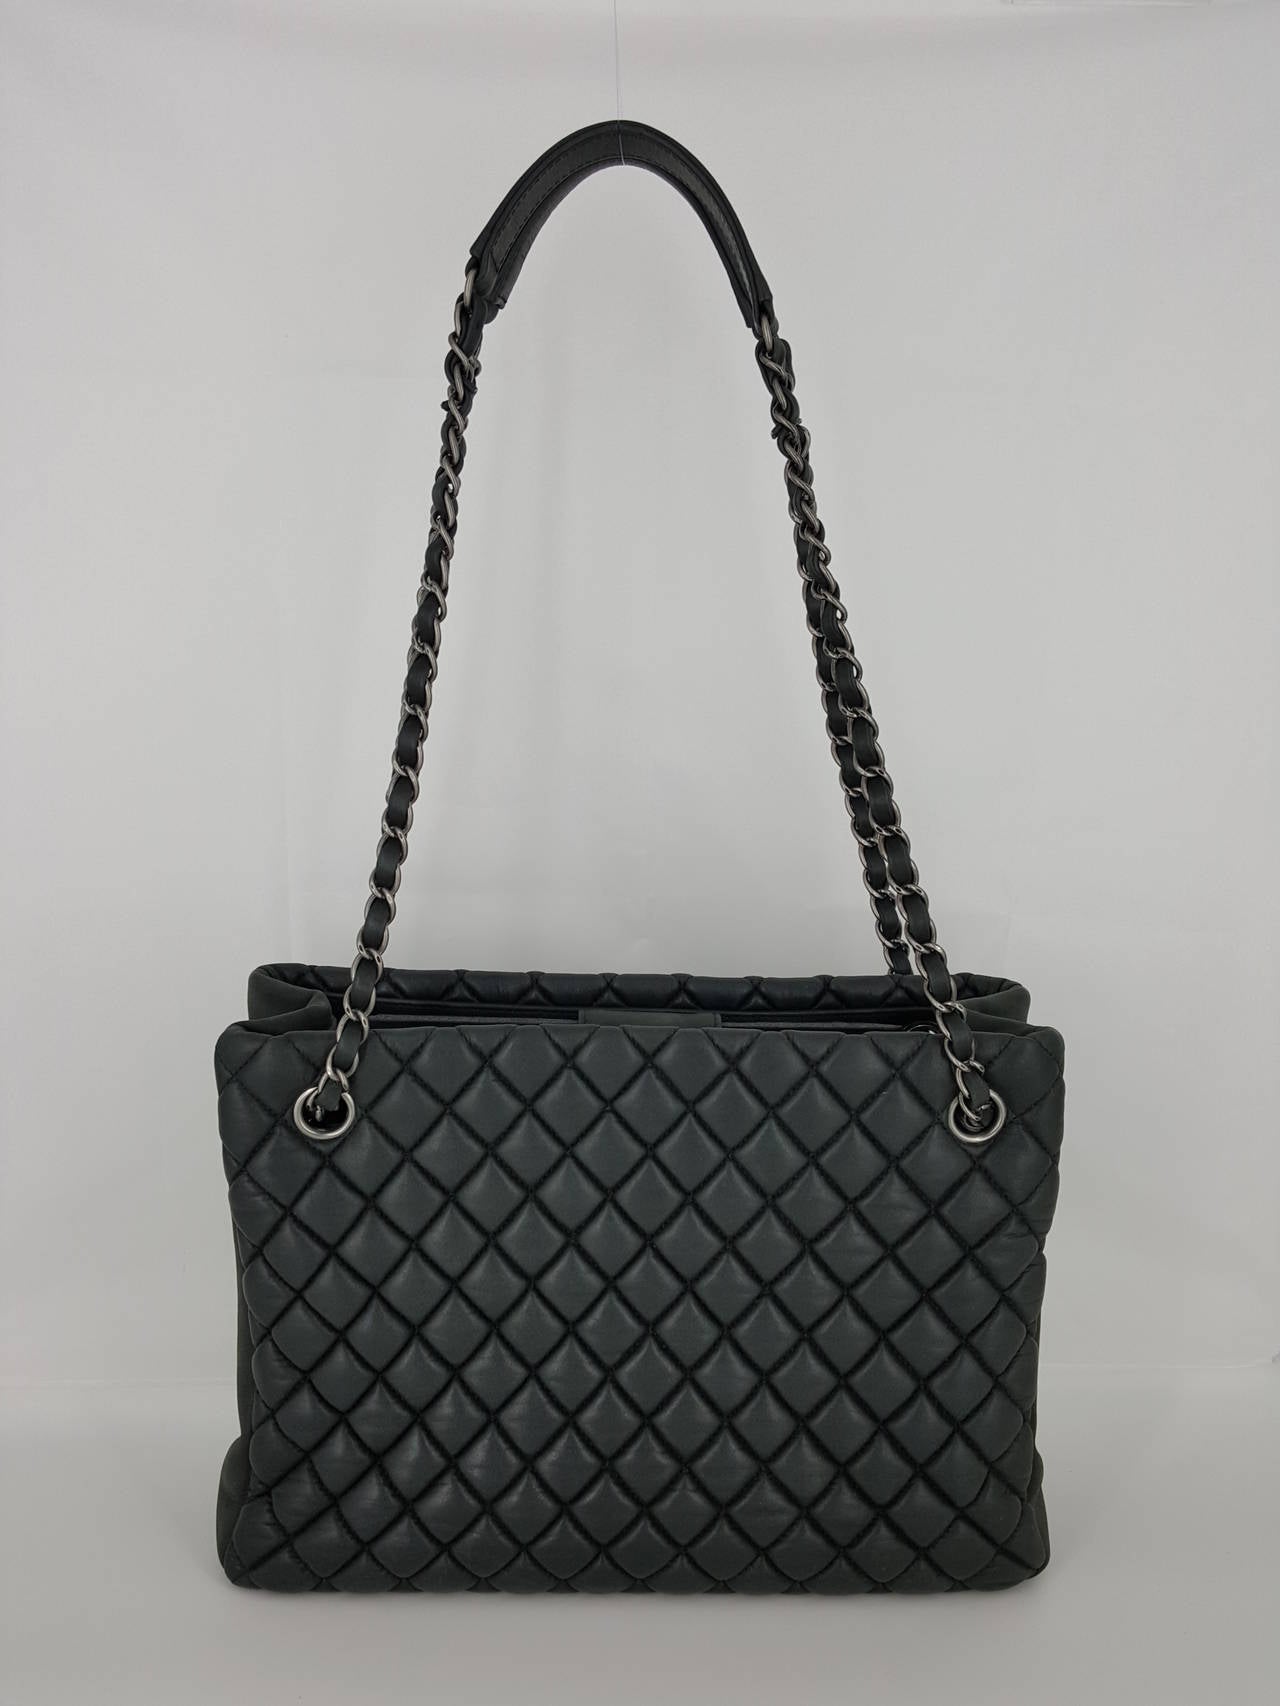 Offered for sale is this CHANEL Petite Shopper in Charcoal which was a Limited Edition for Saks.  This handbag has darkened silver hardware and has a puffy diamond pattern.  Just a little twist from the normal Petite Shopper but makes it unique.  It